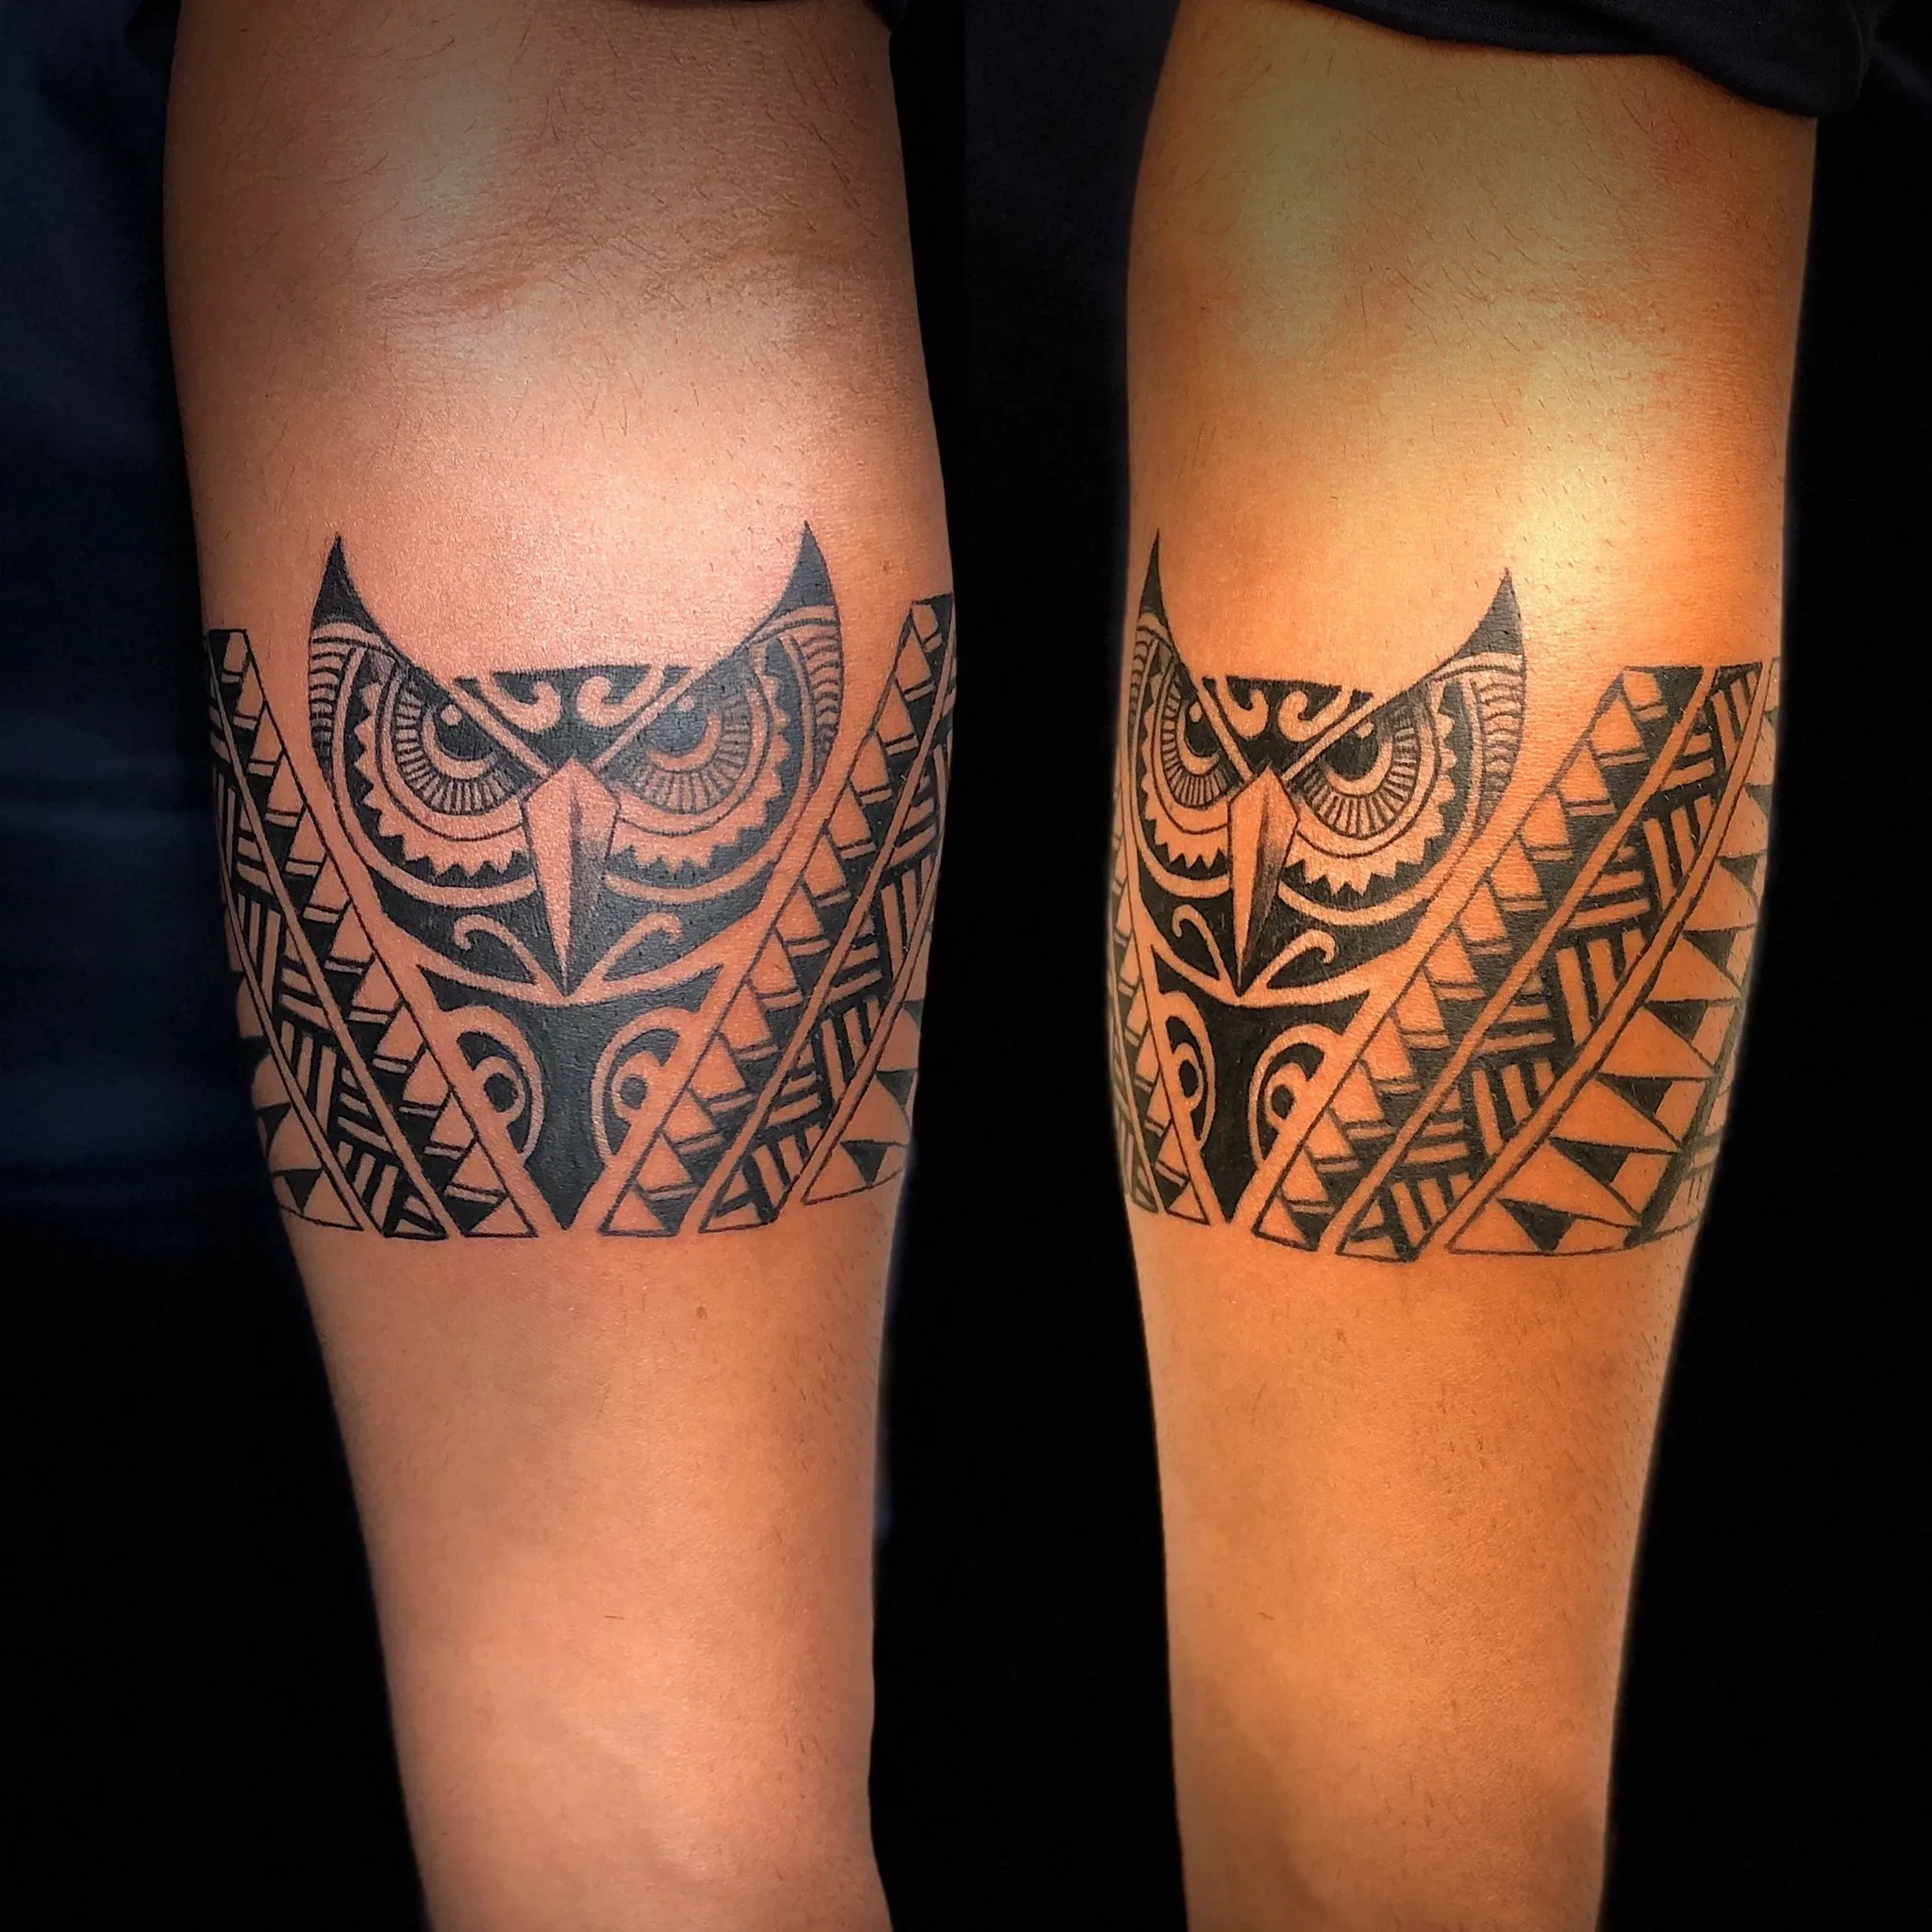 Armband Tattoos: Best Armband Tattoo Designs, Ideas and Their Meanings |  Bored Panda